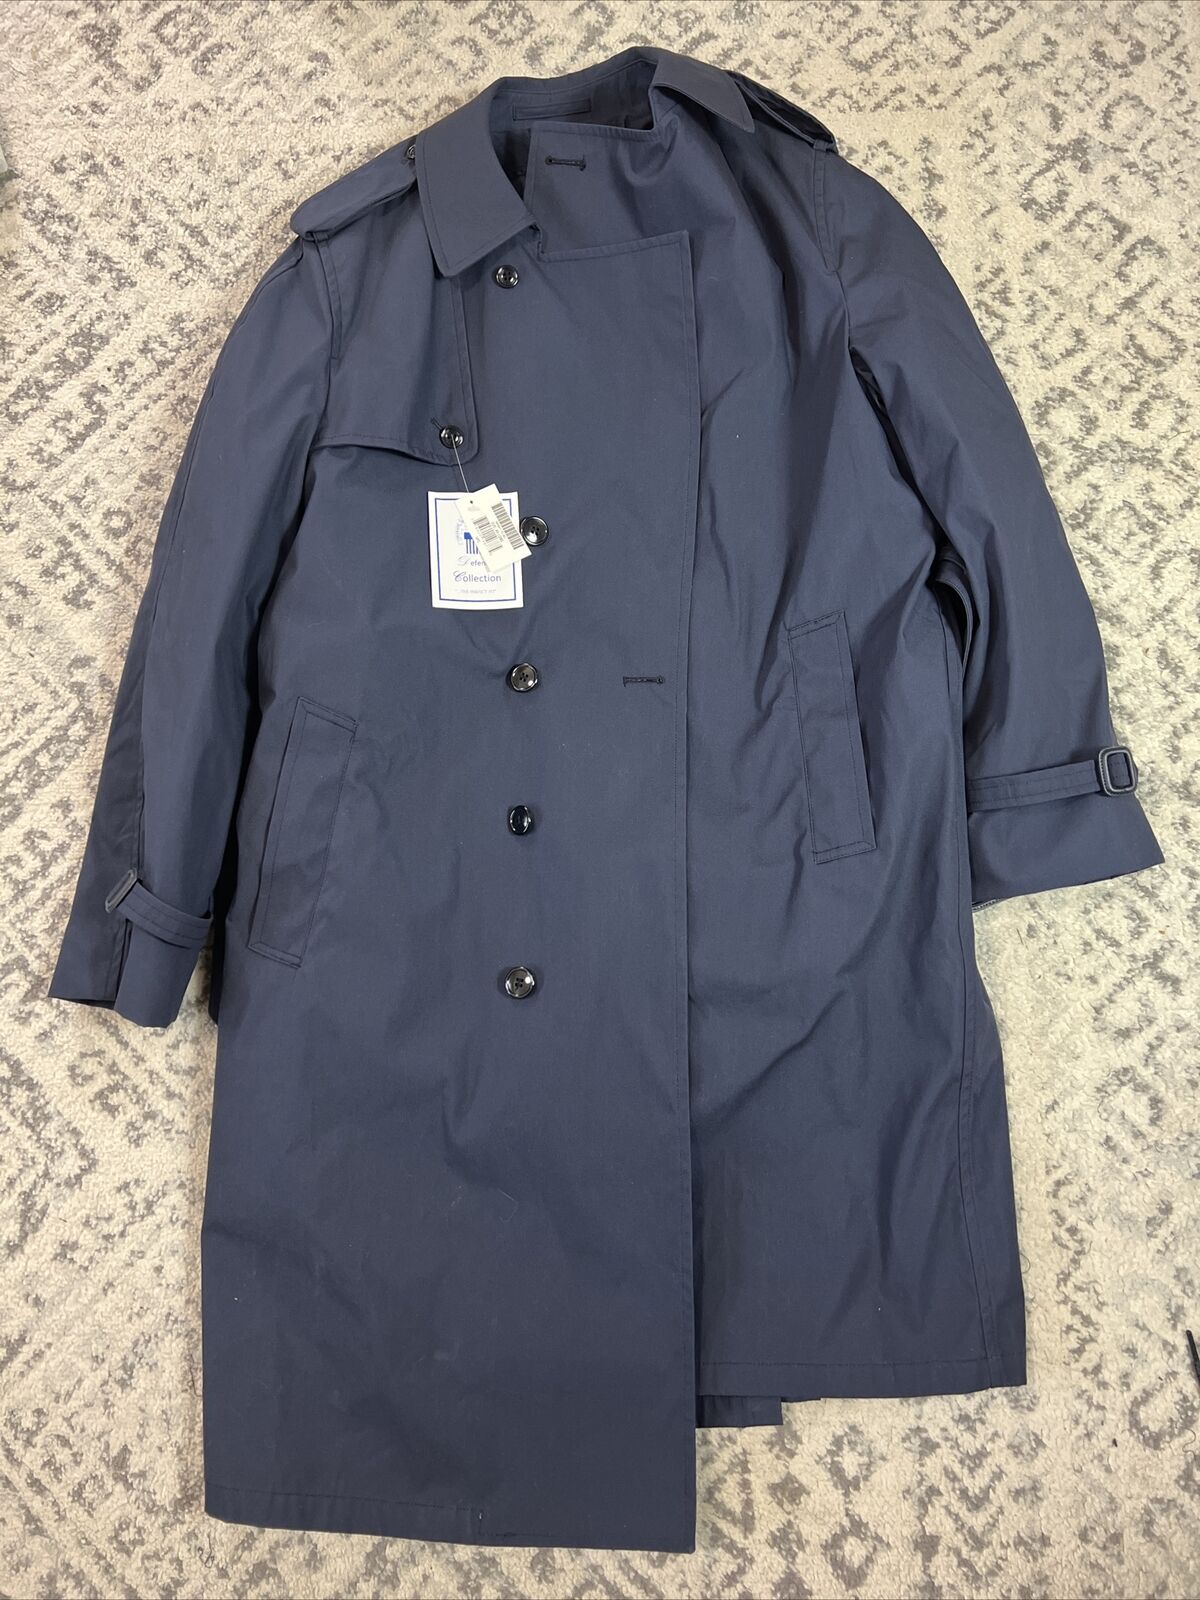 Air Force All Weather Coat With Removable Liner 8405-01-175-2302 Size 46L NWT